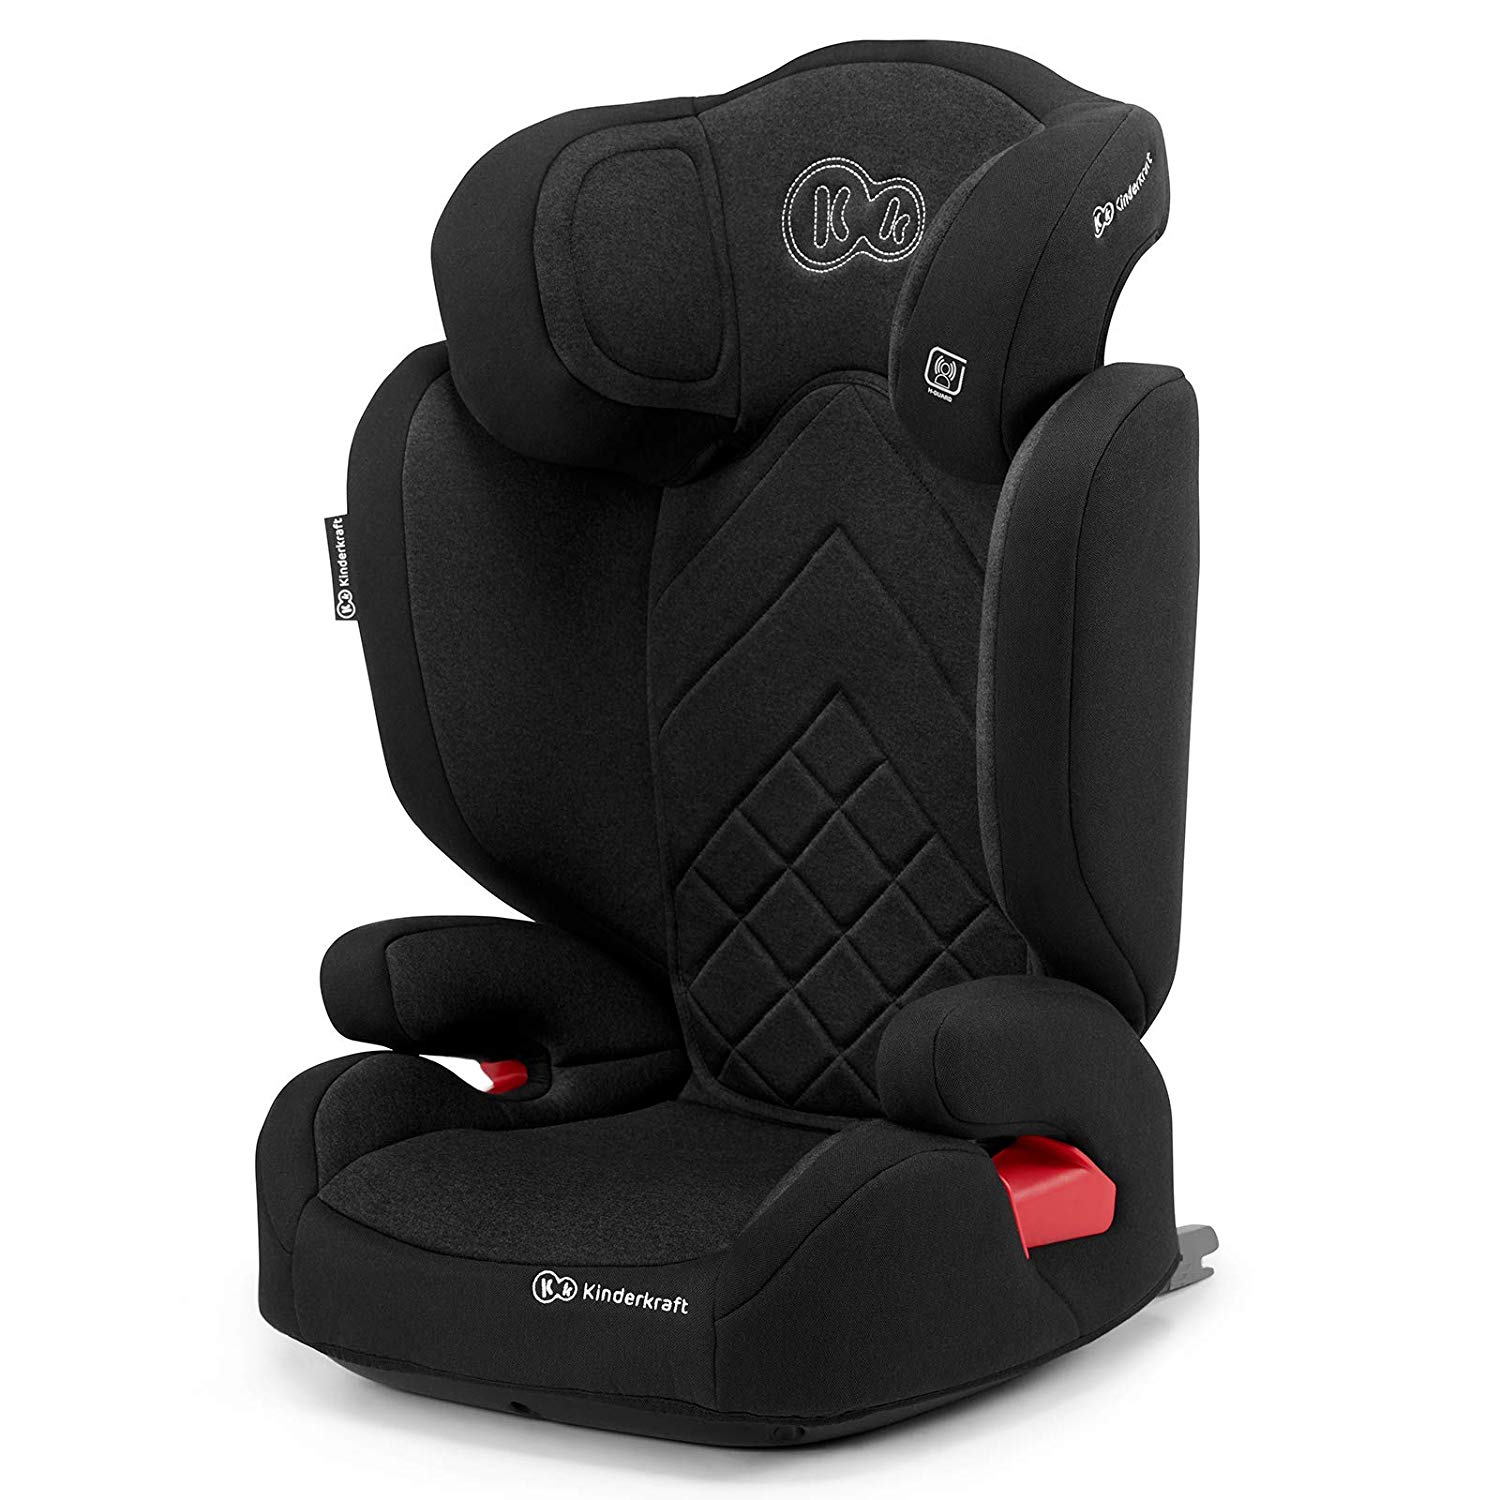 Kinderkraft XPAND Child Car Seat, Child Car Seat, Child Seat with Isofix, Adjustment of Headrest and Width of Side Walls, Group 2/3 15-36 kg, Intertek and ECE R44/04, Black